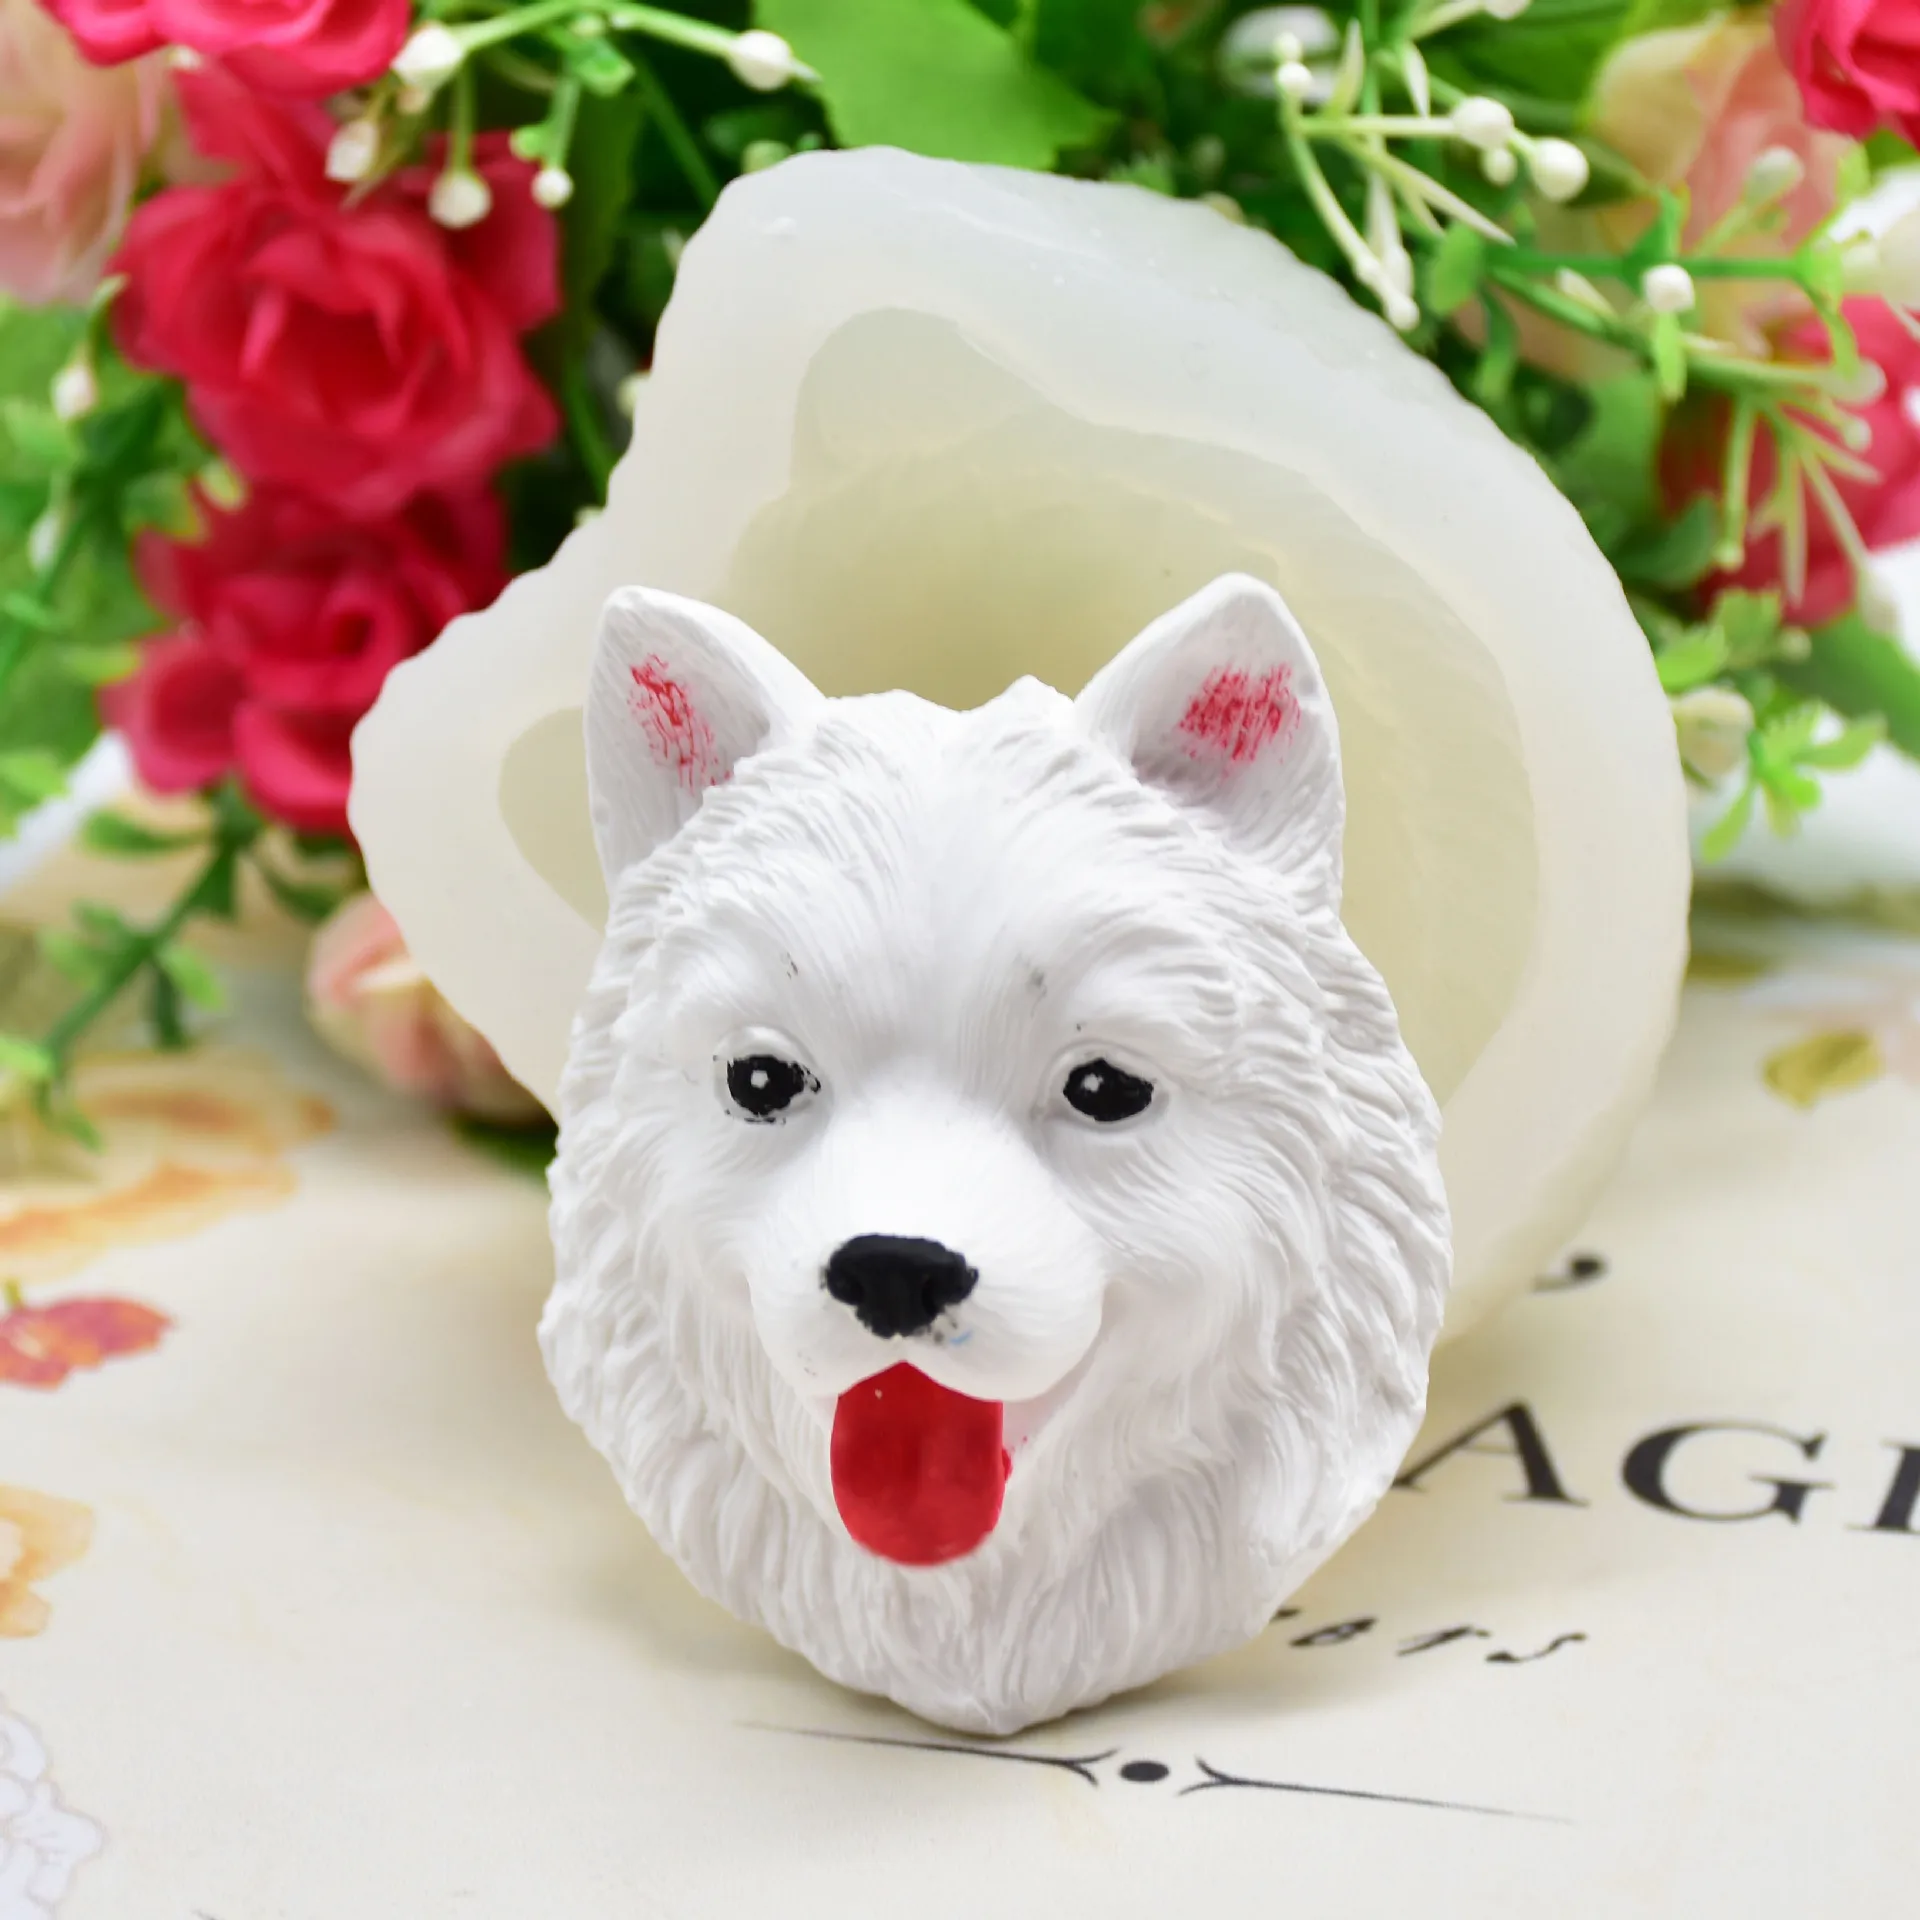 

DIY Baking Samoyed Modeling Aromatherapy Plaster Fondant Cake Decoration Clay Silicone Mold Baking Pastry Accessories Supplies